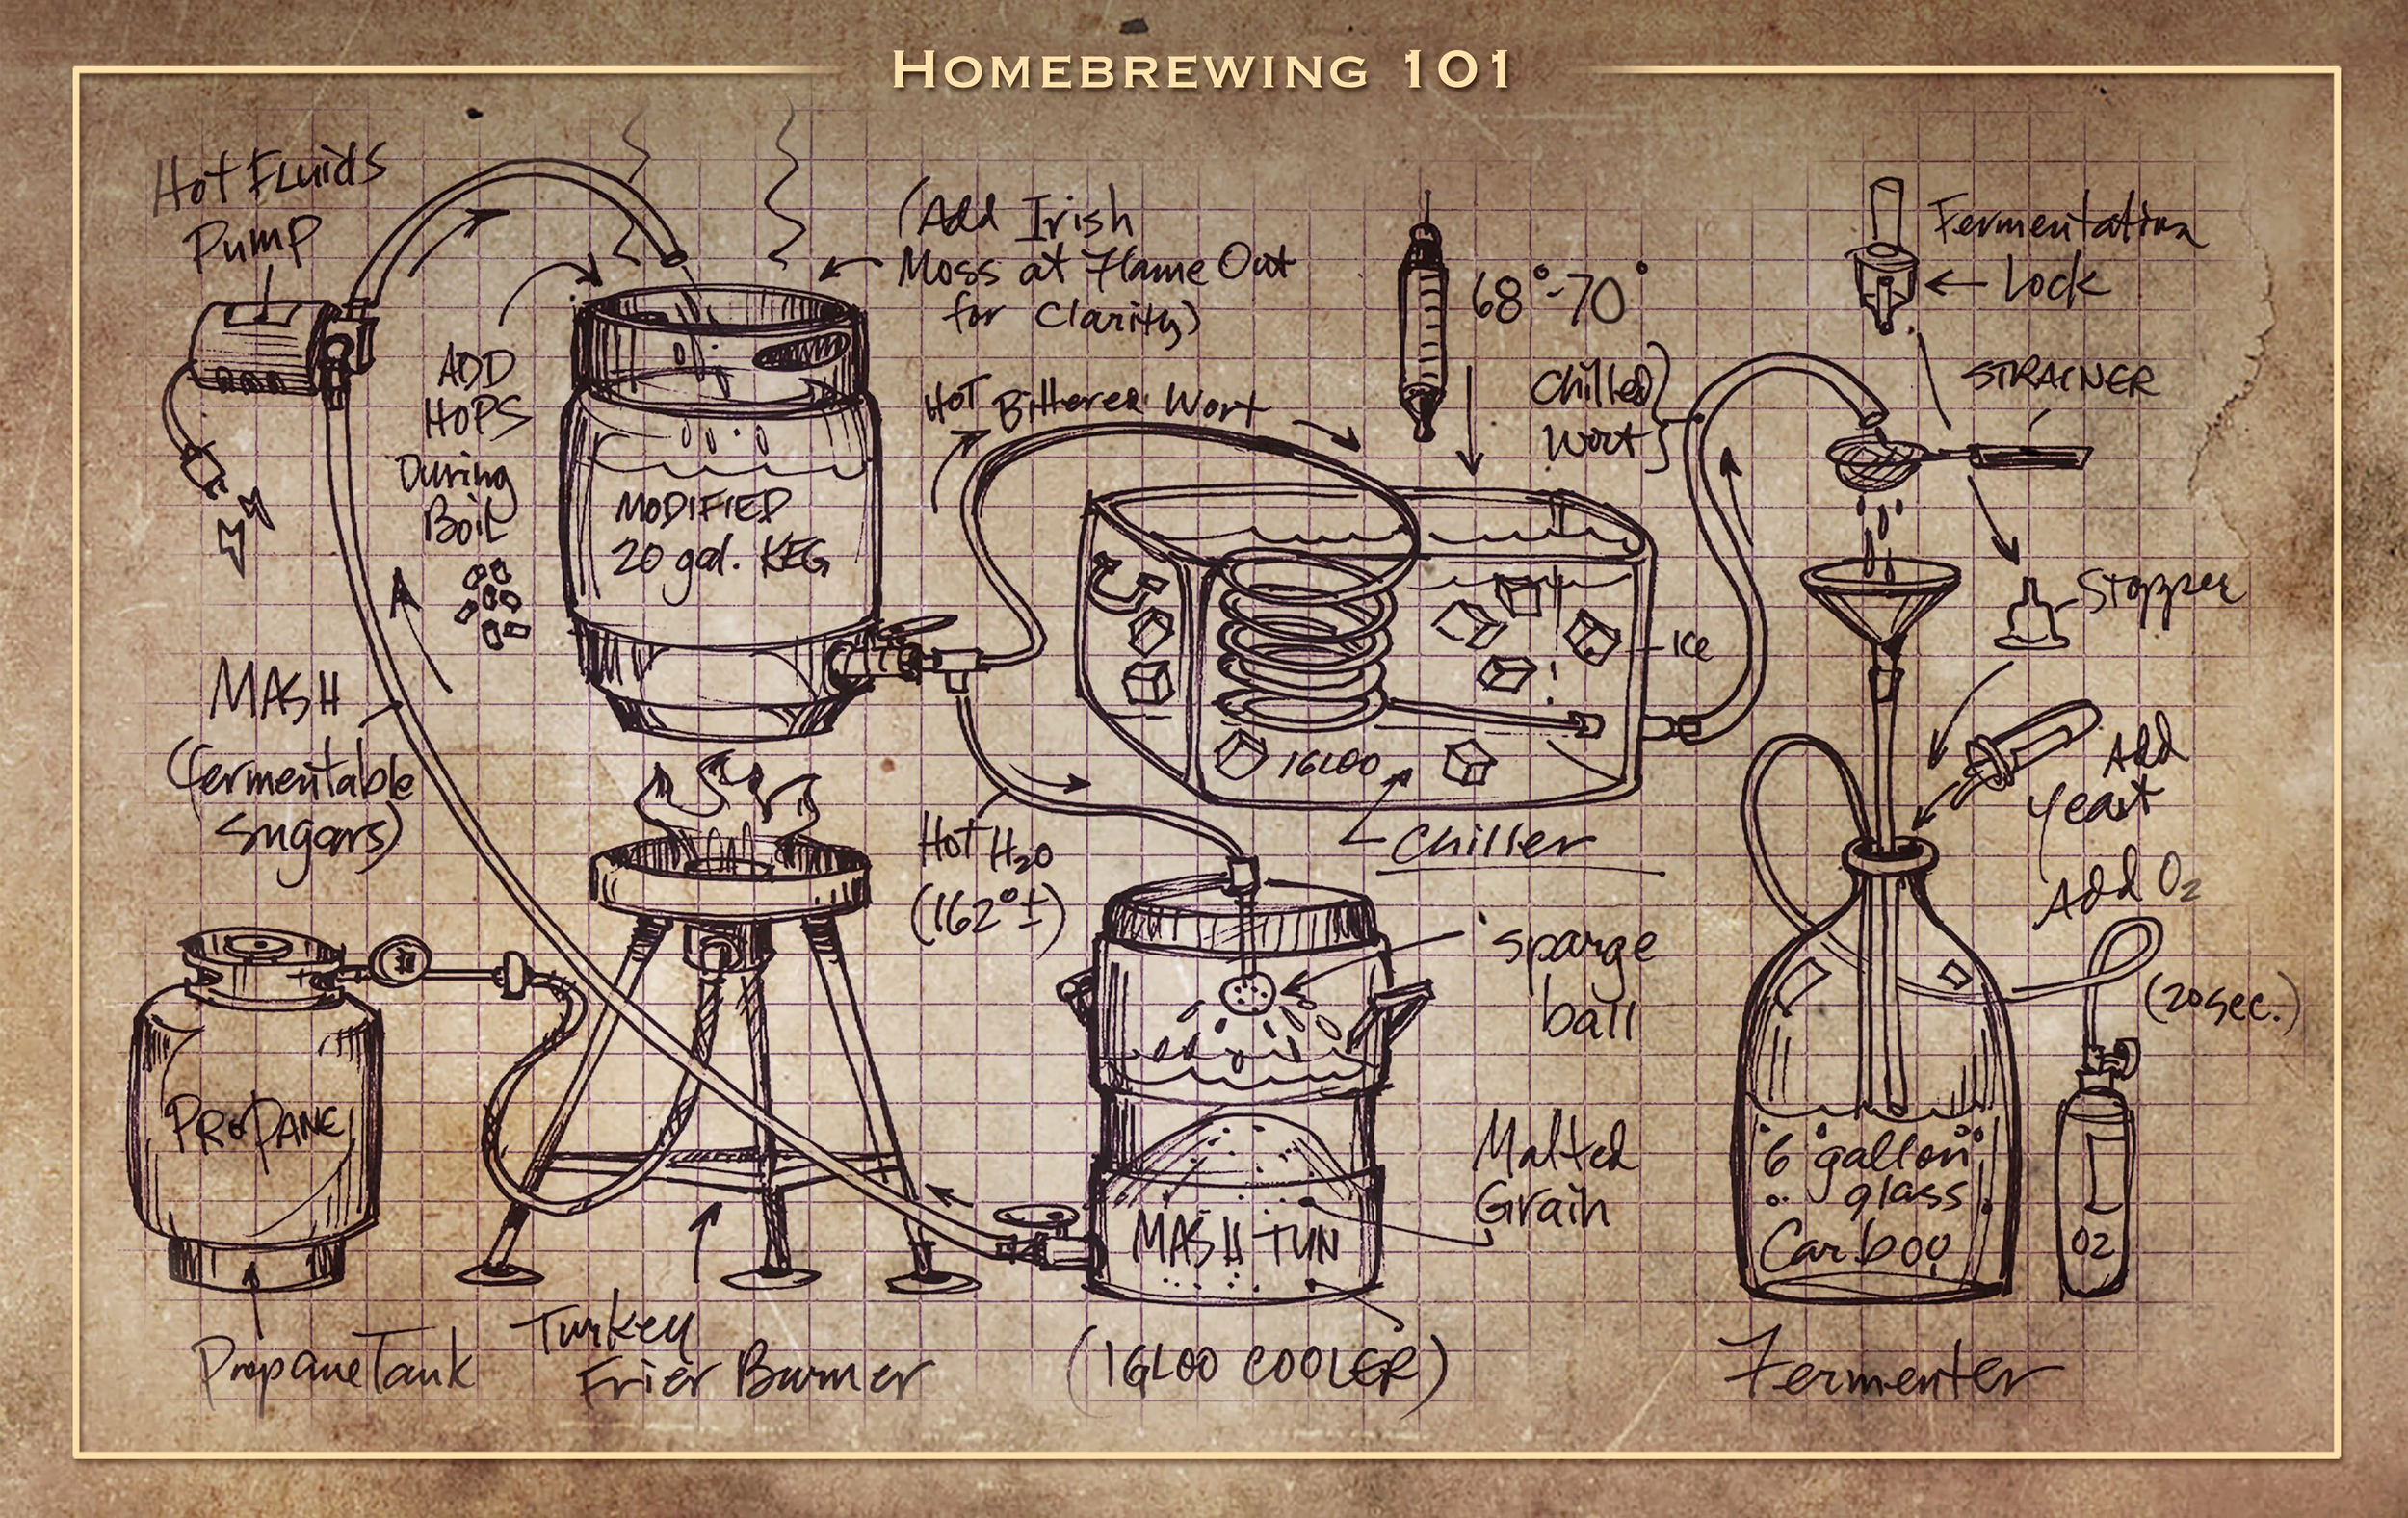  A batch of homebrew begins in a mash tun, where brewers heat malted grain to make wort. Brewers combine wort and yeast in a fermentor where yeast transforms wort into beer. Image credit: Kerry Kenemer. 